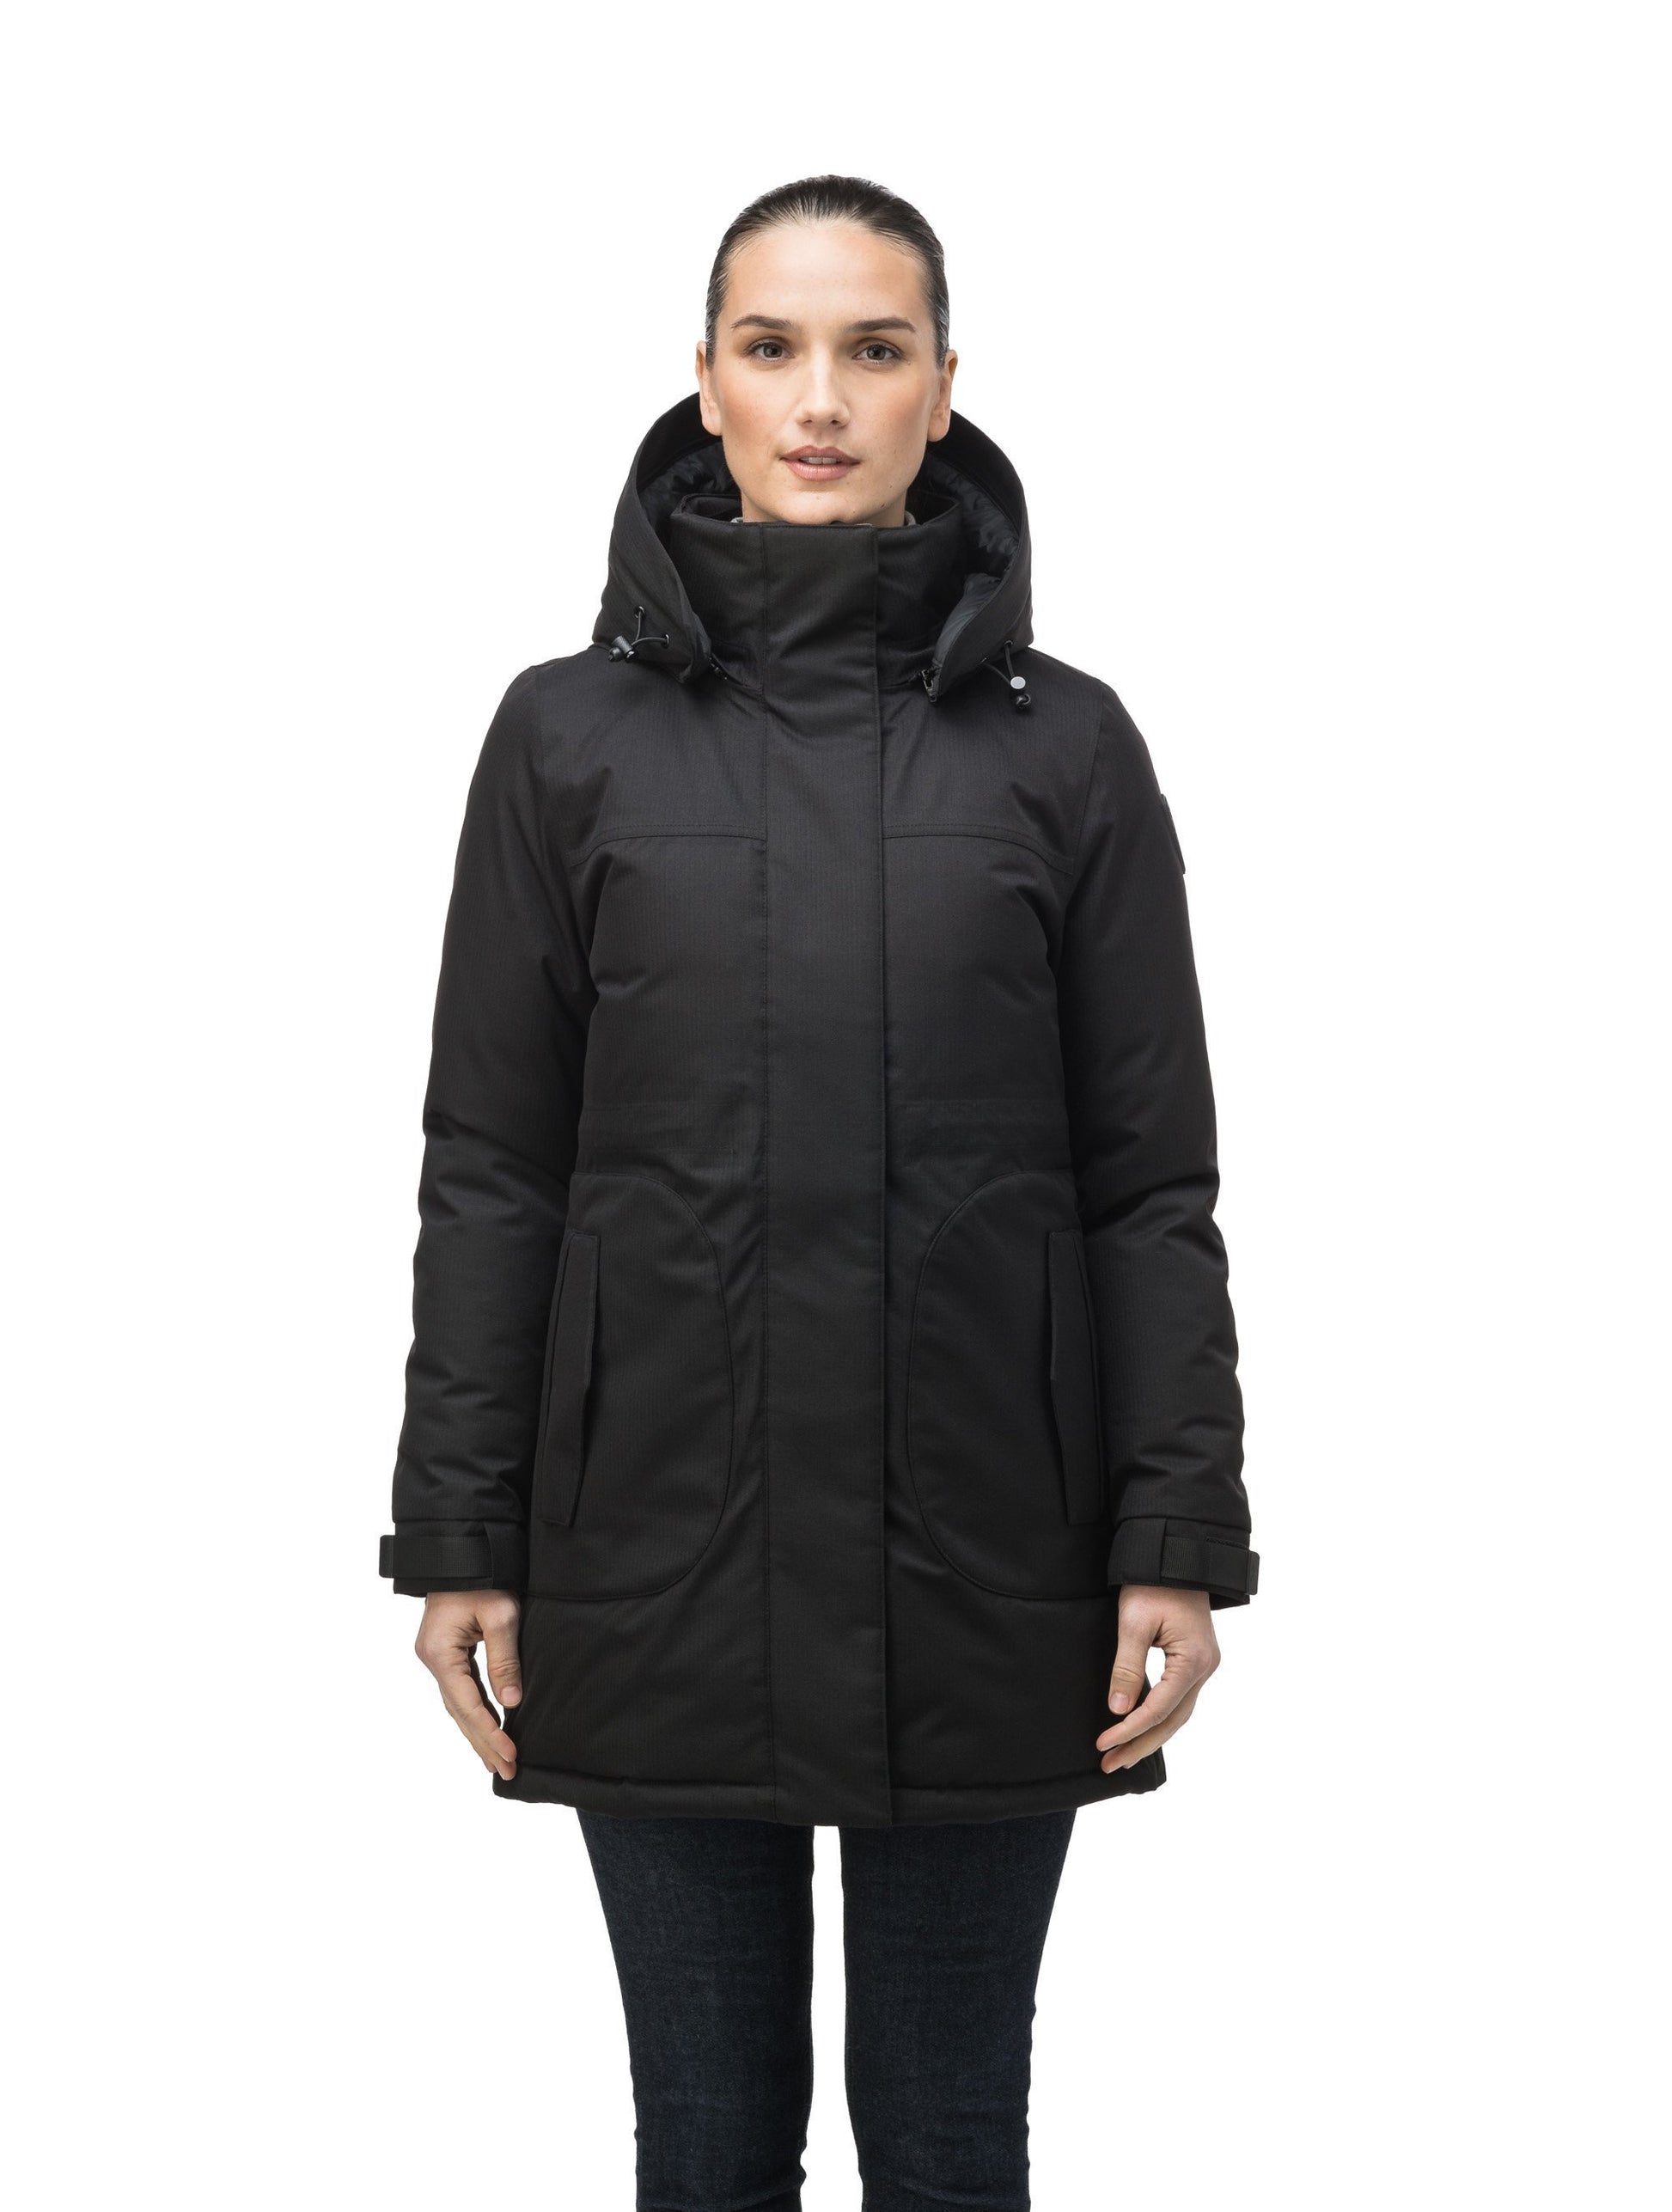 Thigh length women's down filled parka with side entry pockets and drawcord waist, removable hood and fur trim in Black